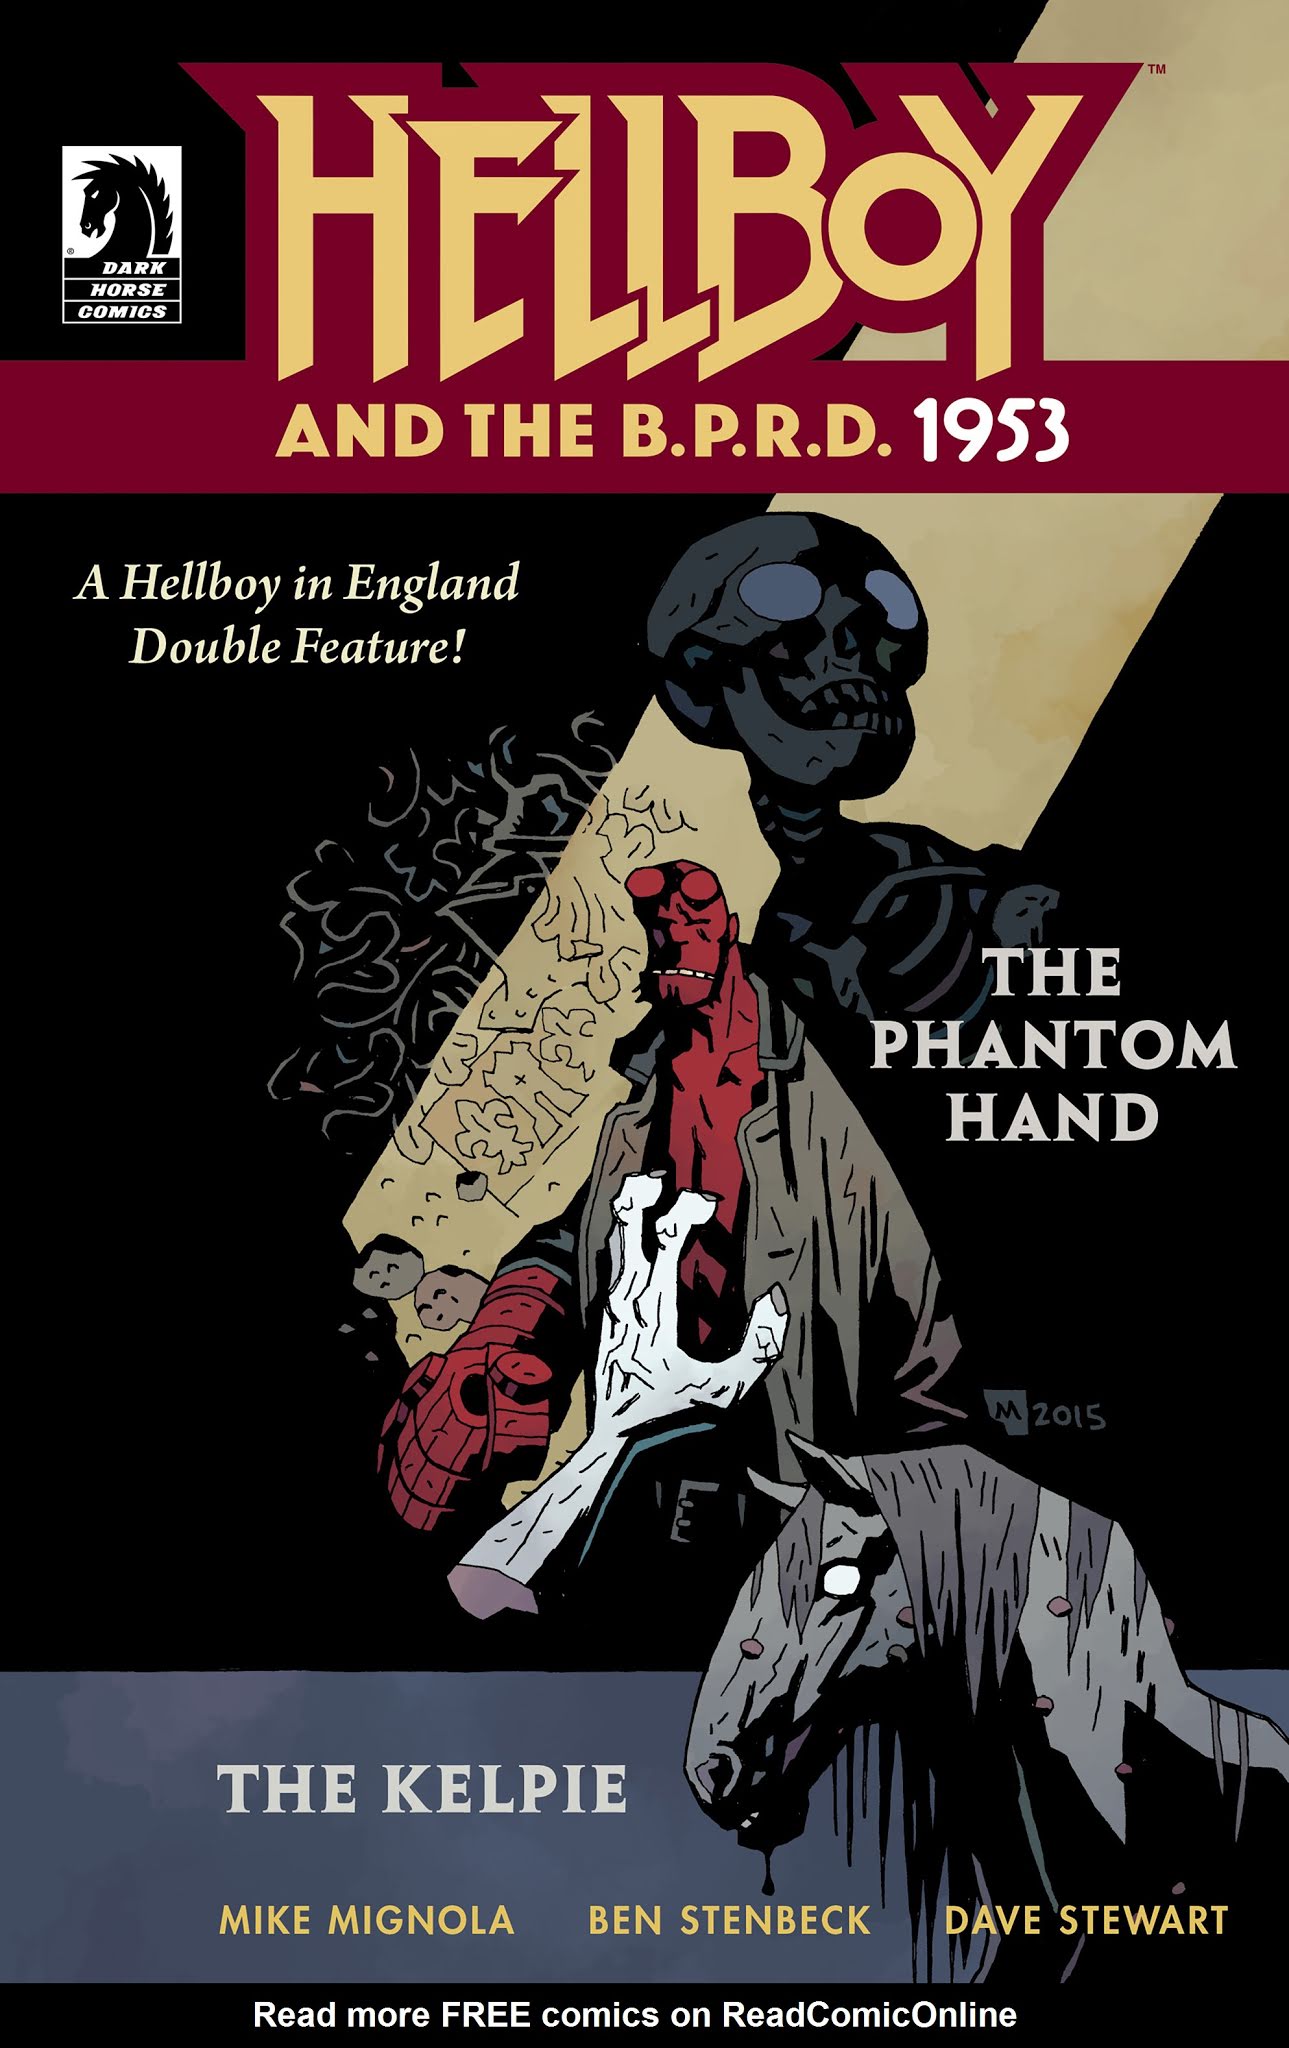 Read online Hellboy and the B.P.R.D.: 1953 - The Phantom Hand & the Kelpie comic -  Issue # Full - 1